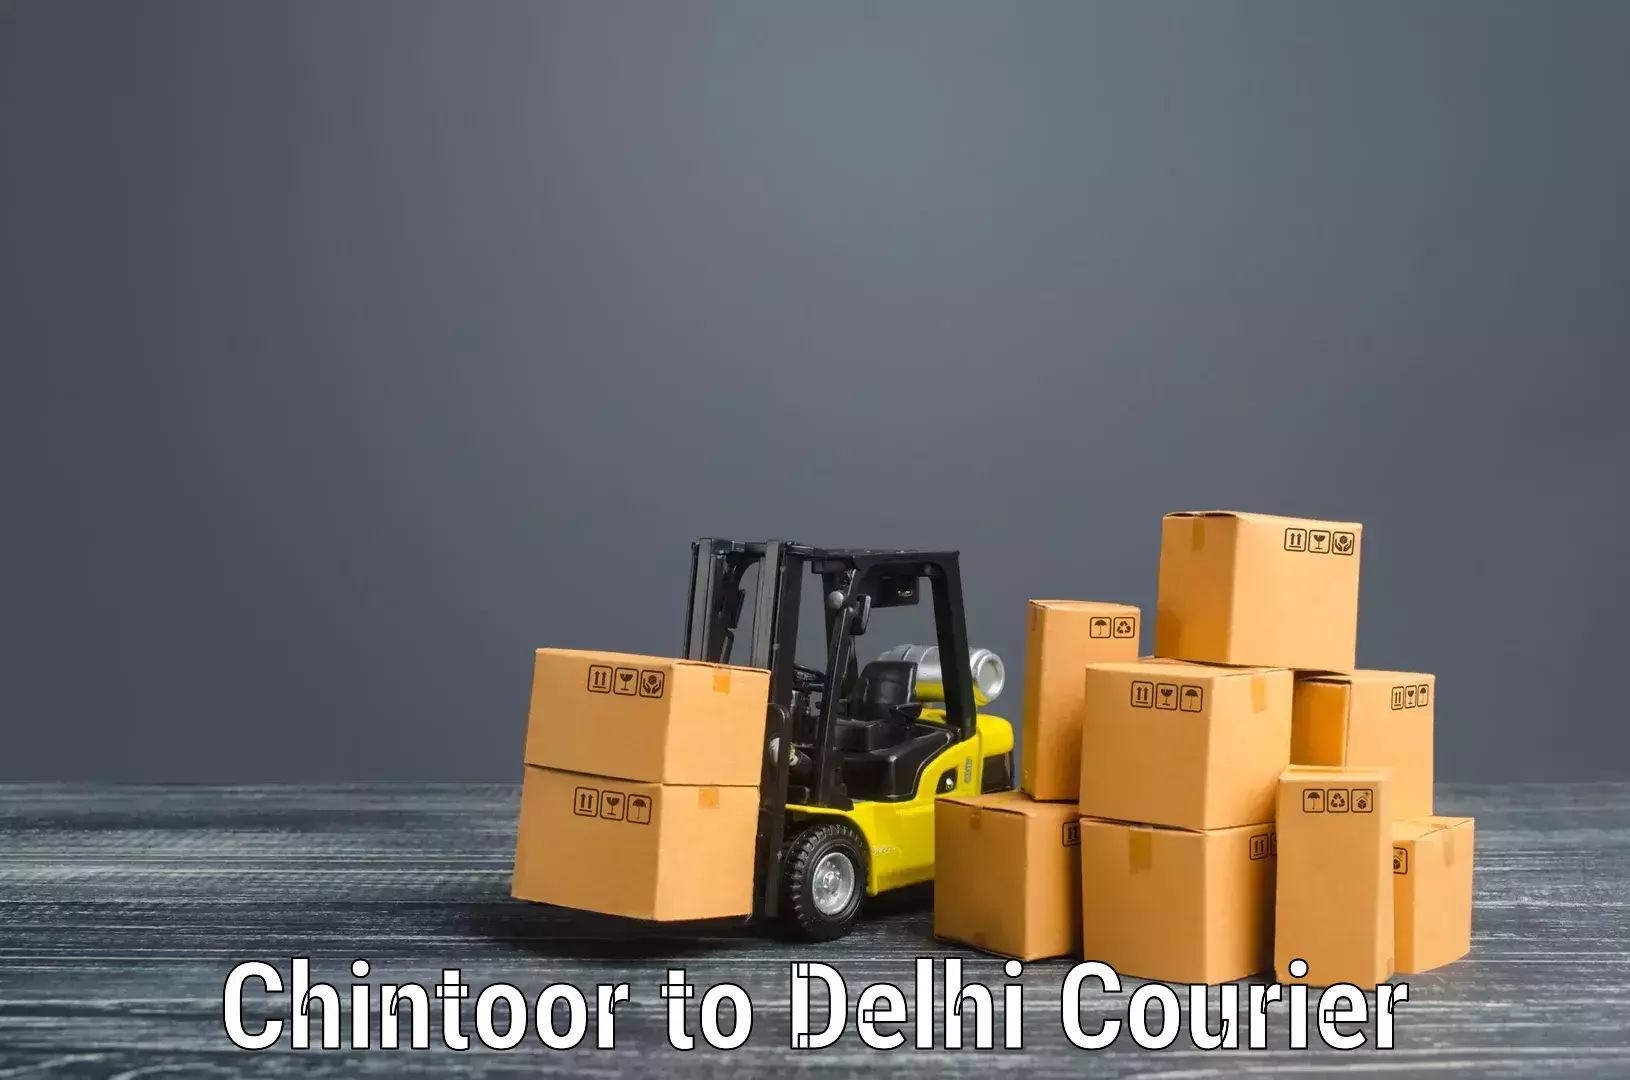 Furniture relocation experts Chintoor to Delhi